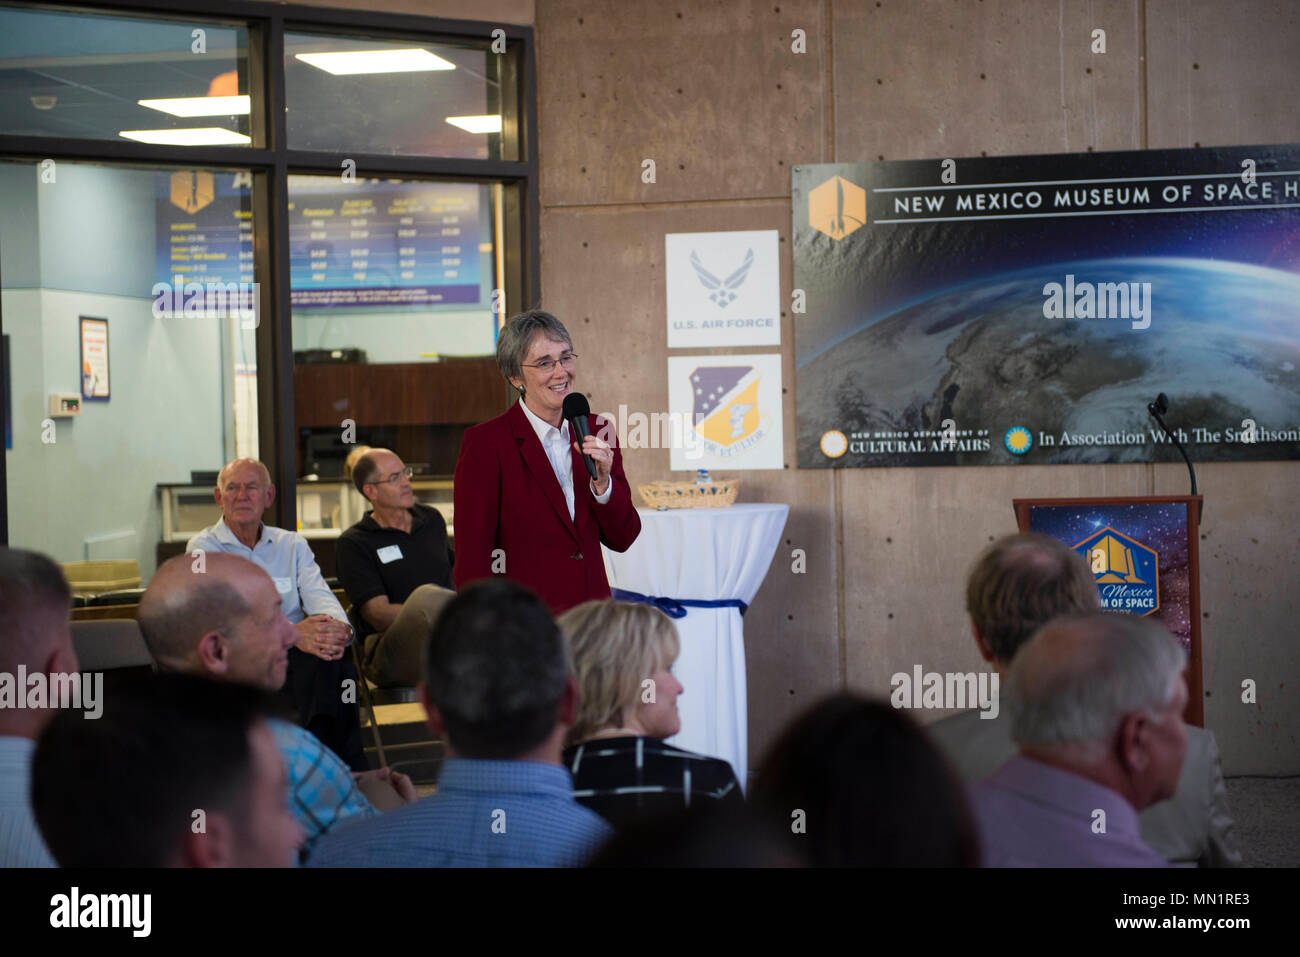 Secretary of the Air Force Heather Wilson speaks with members of MainGate United, at the New Mexico Museum of Space history in Alamogordo, N.M., Aug. 8, 2017. Wilson came to Holloman Air Force Base and is here for a live-fly experiment with off-the-shelf aircraft. The Air Force is pursuing a Light Attack Capabilities Experimentation Campaign, which has grown out of our Close Air Support Experimentation Campaign. The Campaign is being led by the Air Force Strategic Development Planning and Experimentation Office under Air Force Materiel Command. (U.S. Air Force photo by Tech. Sgt. Amanda Junk) Stock Photo